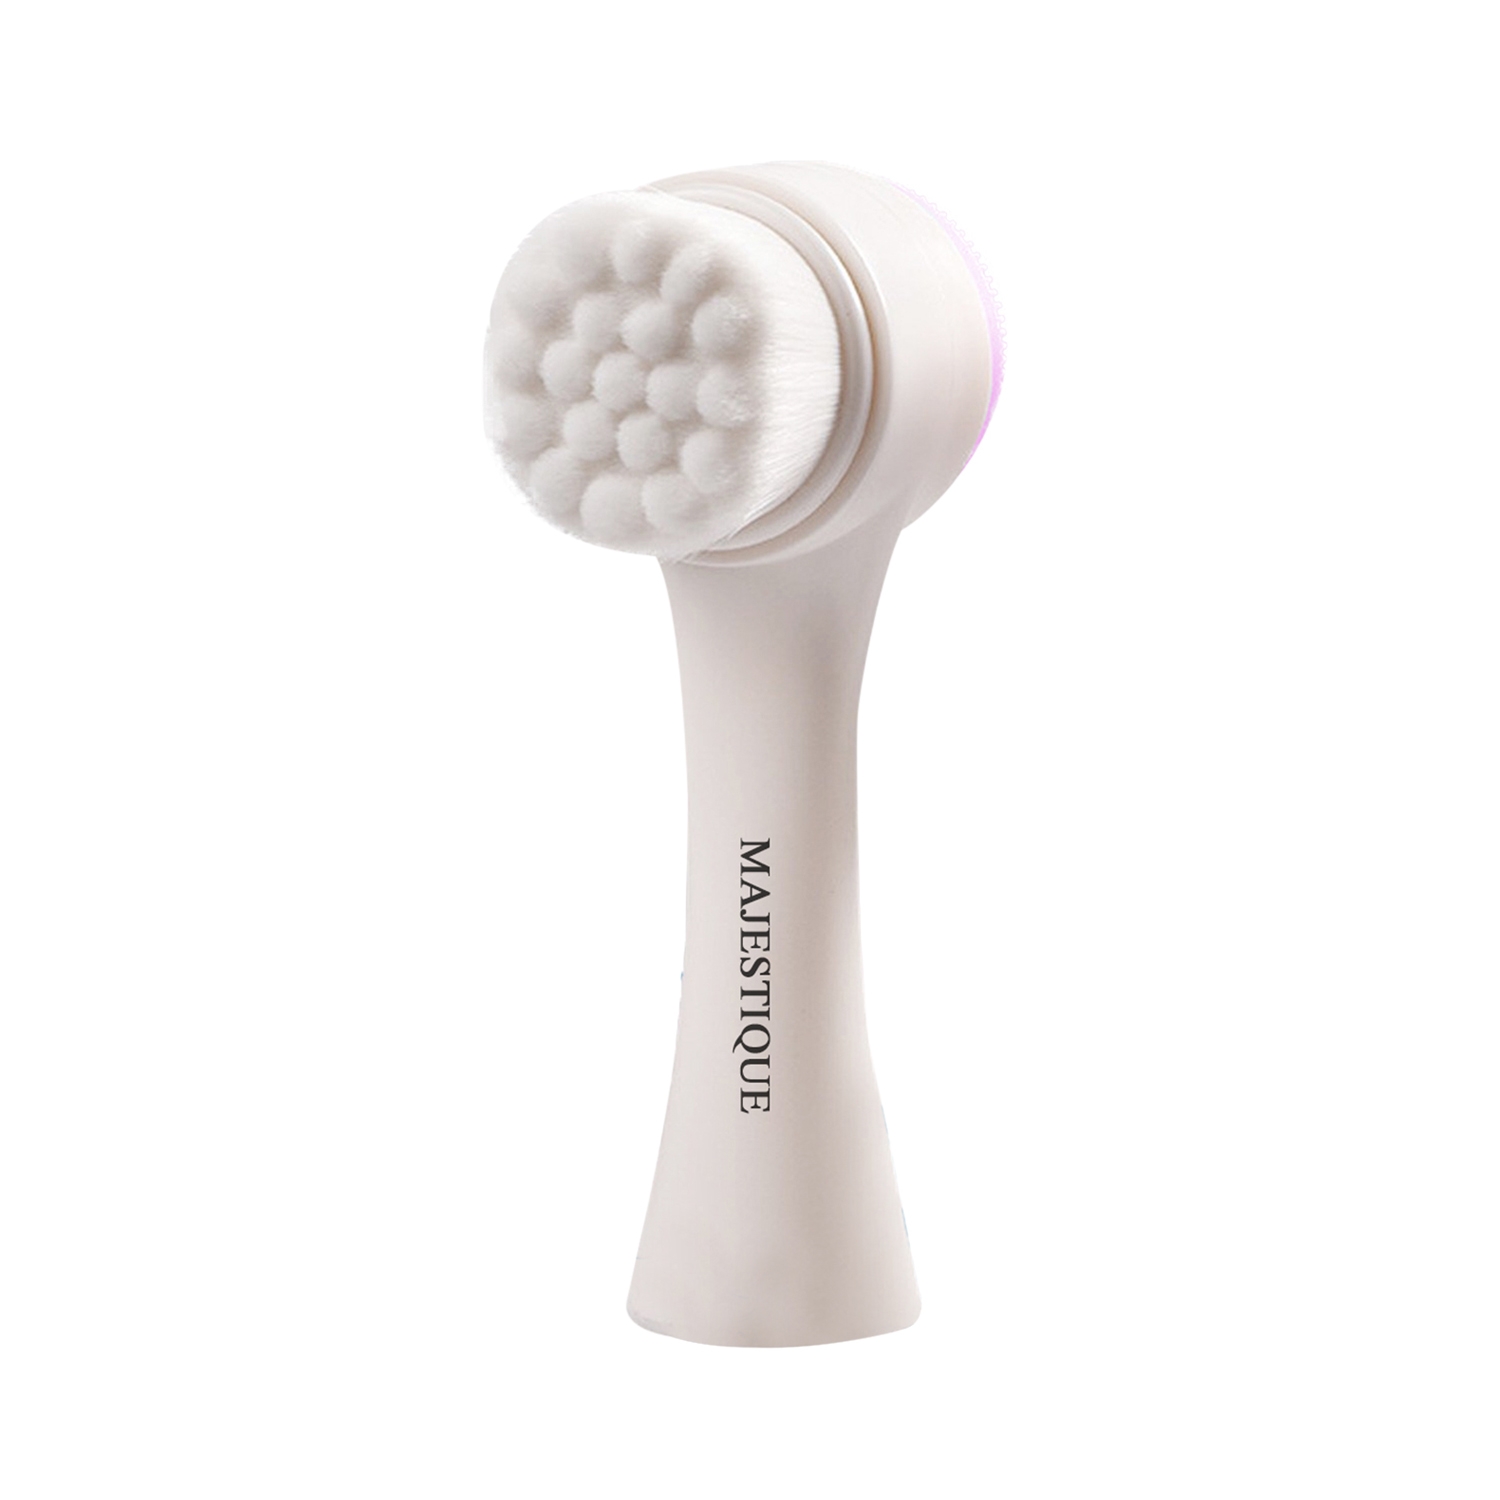 Majestique | Majestique Face Exfoliator Deep Pore Cleaning Double Sided Face Cleanser Brush